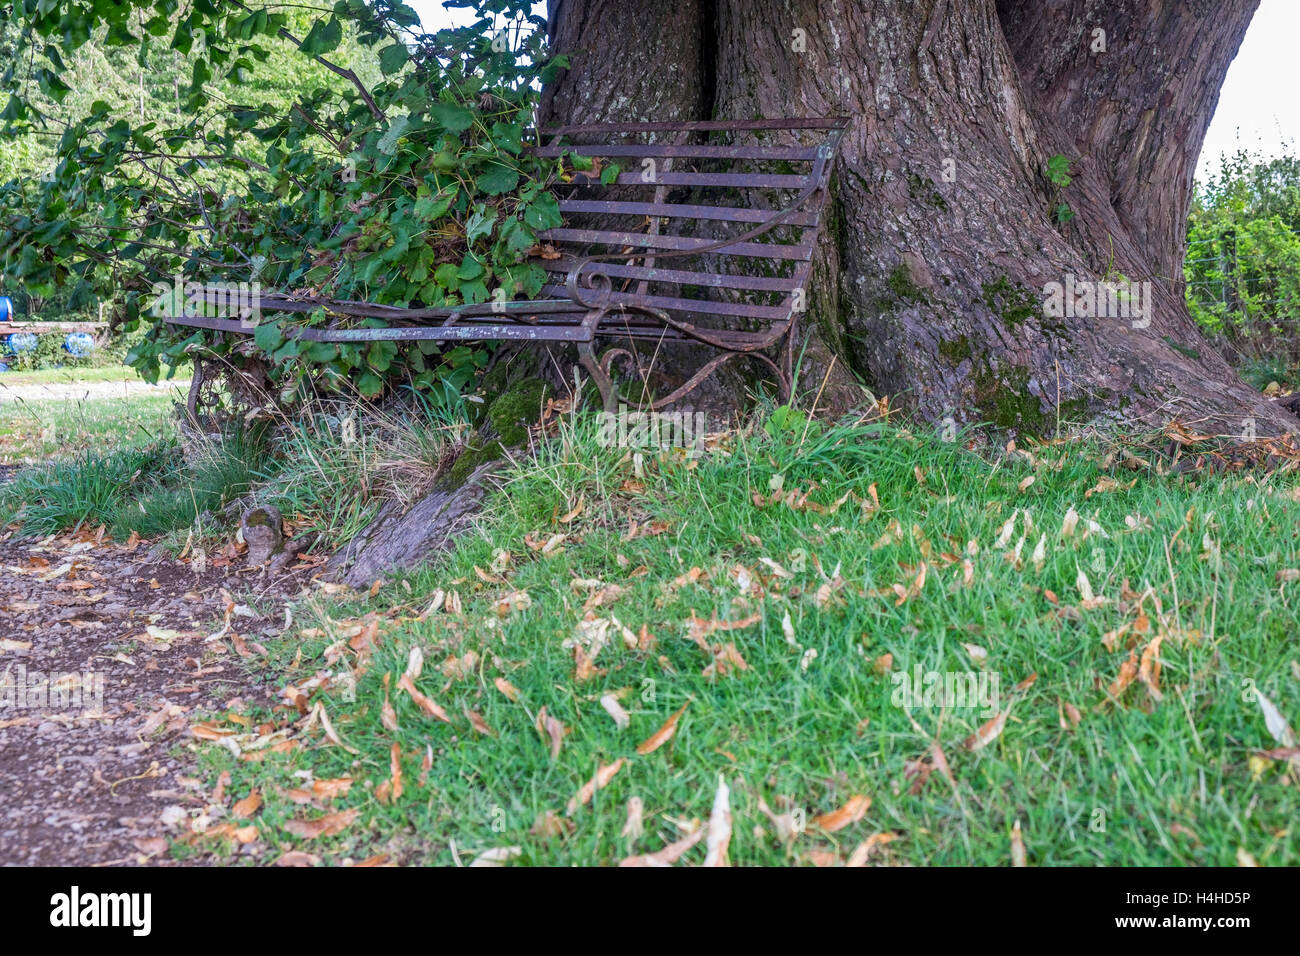 A small metal bench that is being overgrown by trees and shrubs in the lea of a large tree. Stock Photo